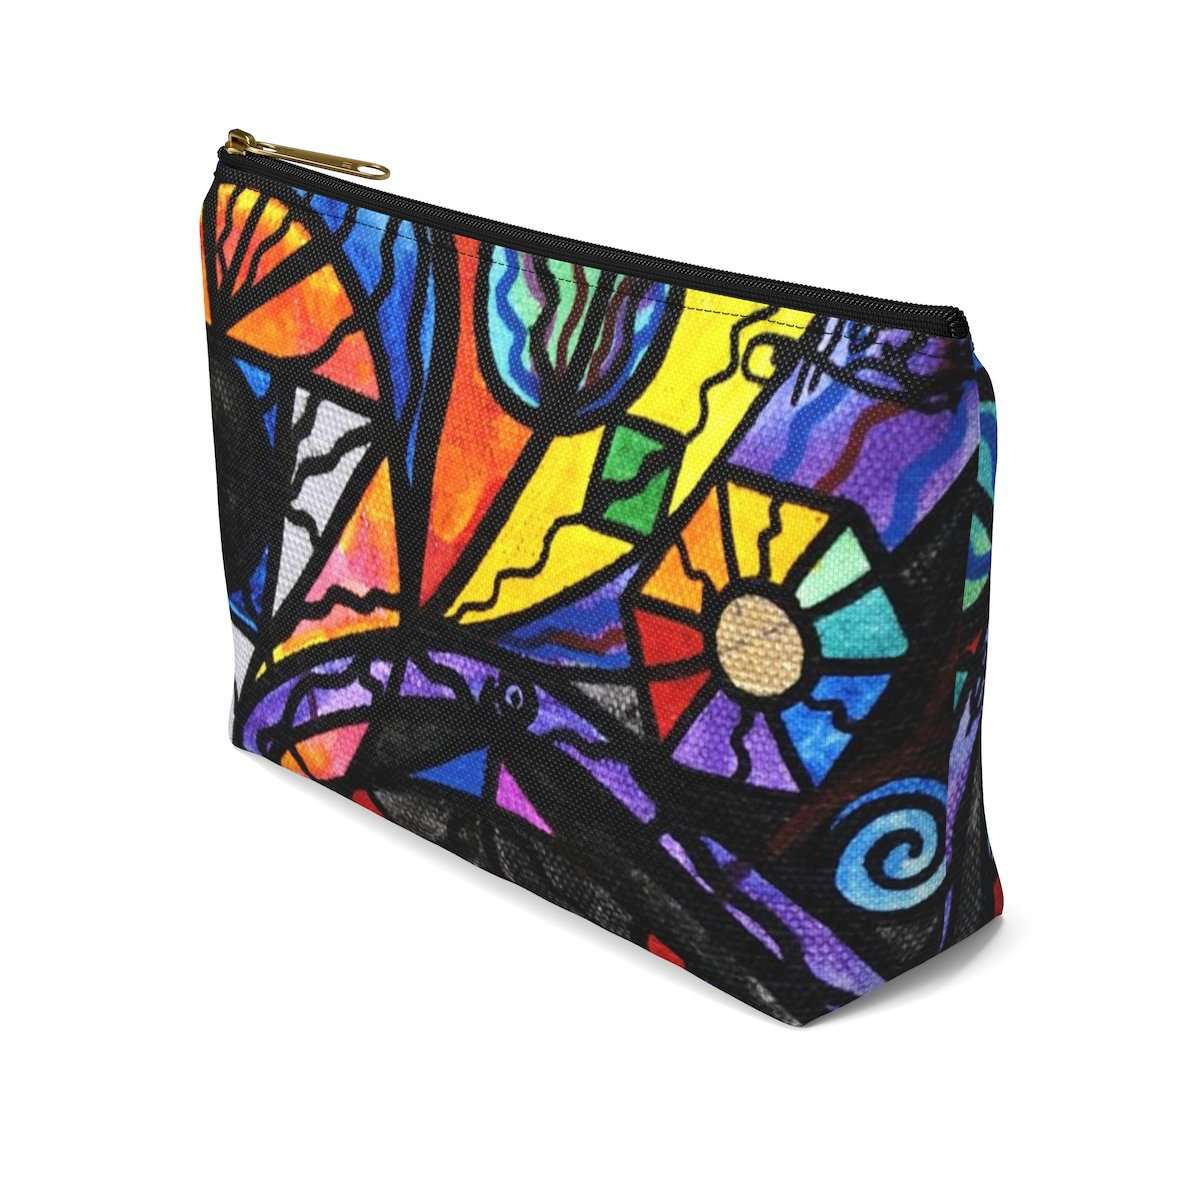 we-are-the-best-place-to-buy-alchemy-accessory-pouch-w-t-bottom-sale_9.jpg